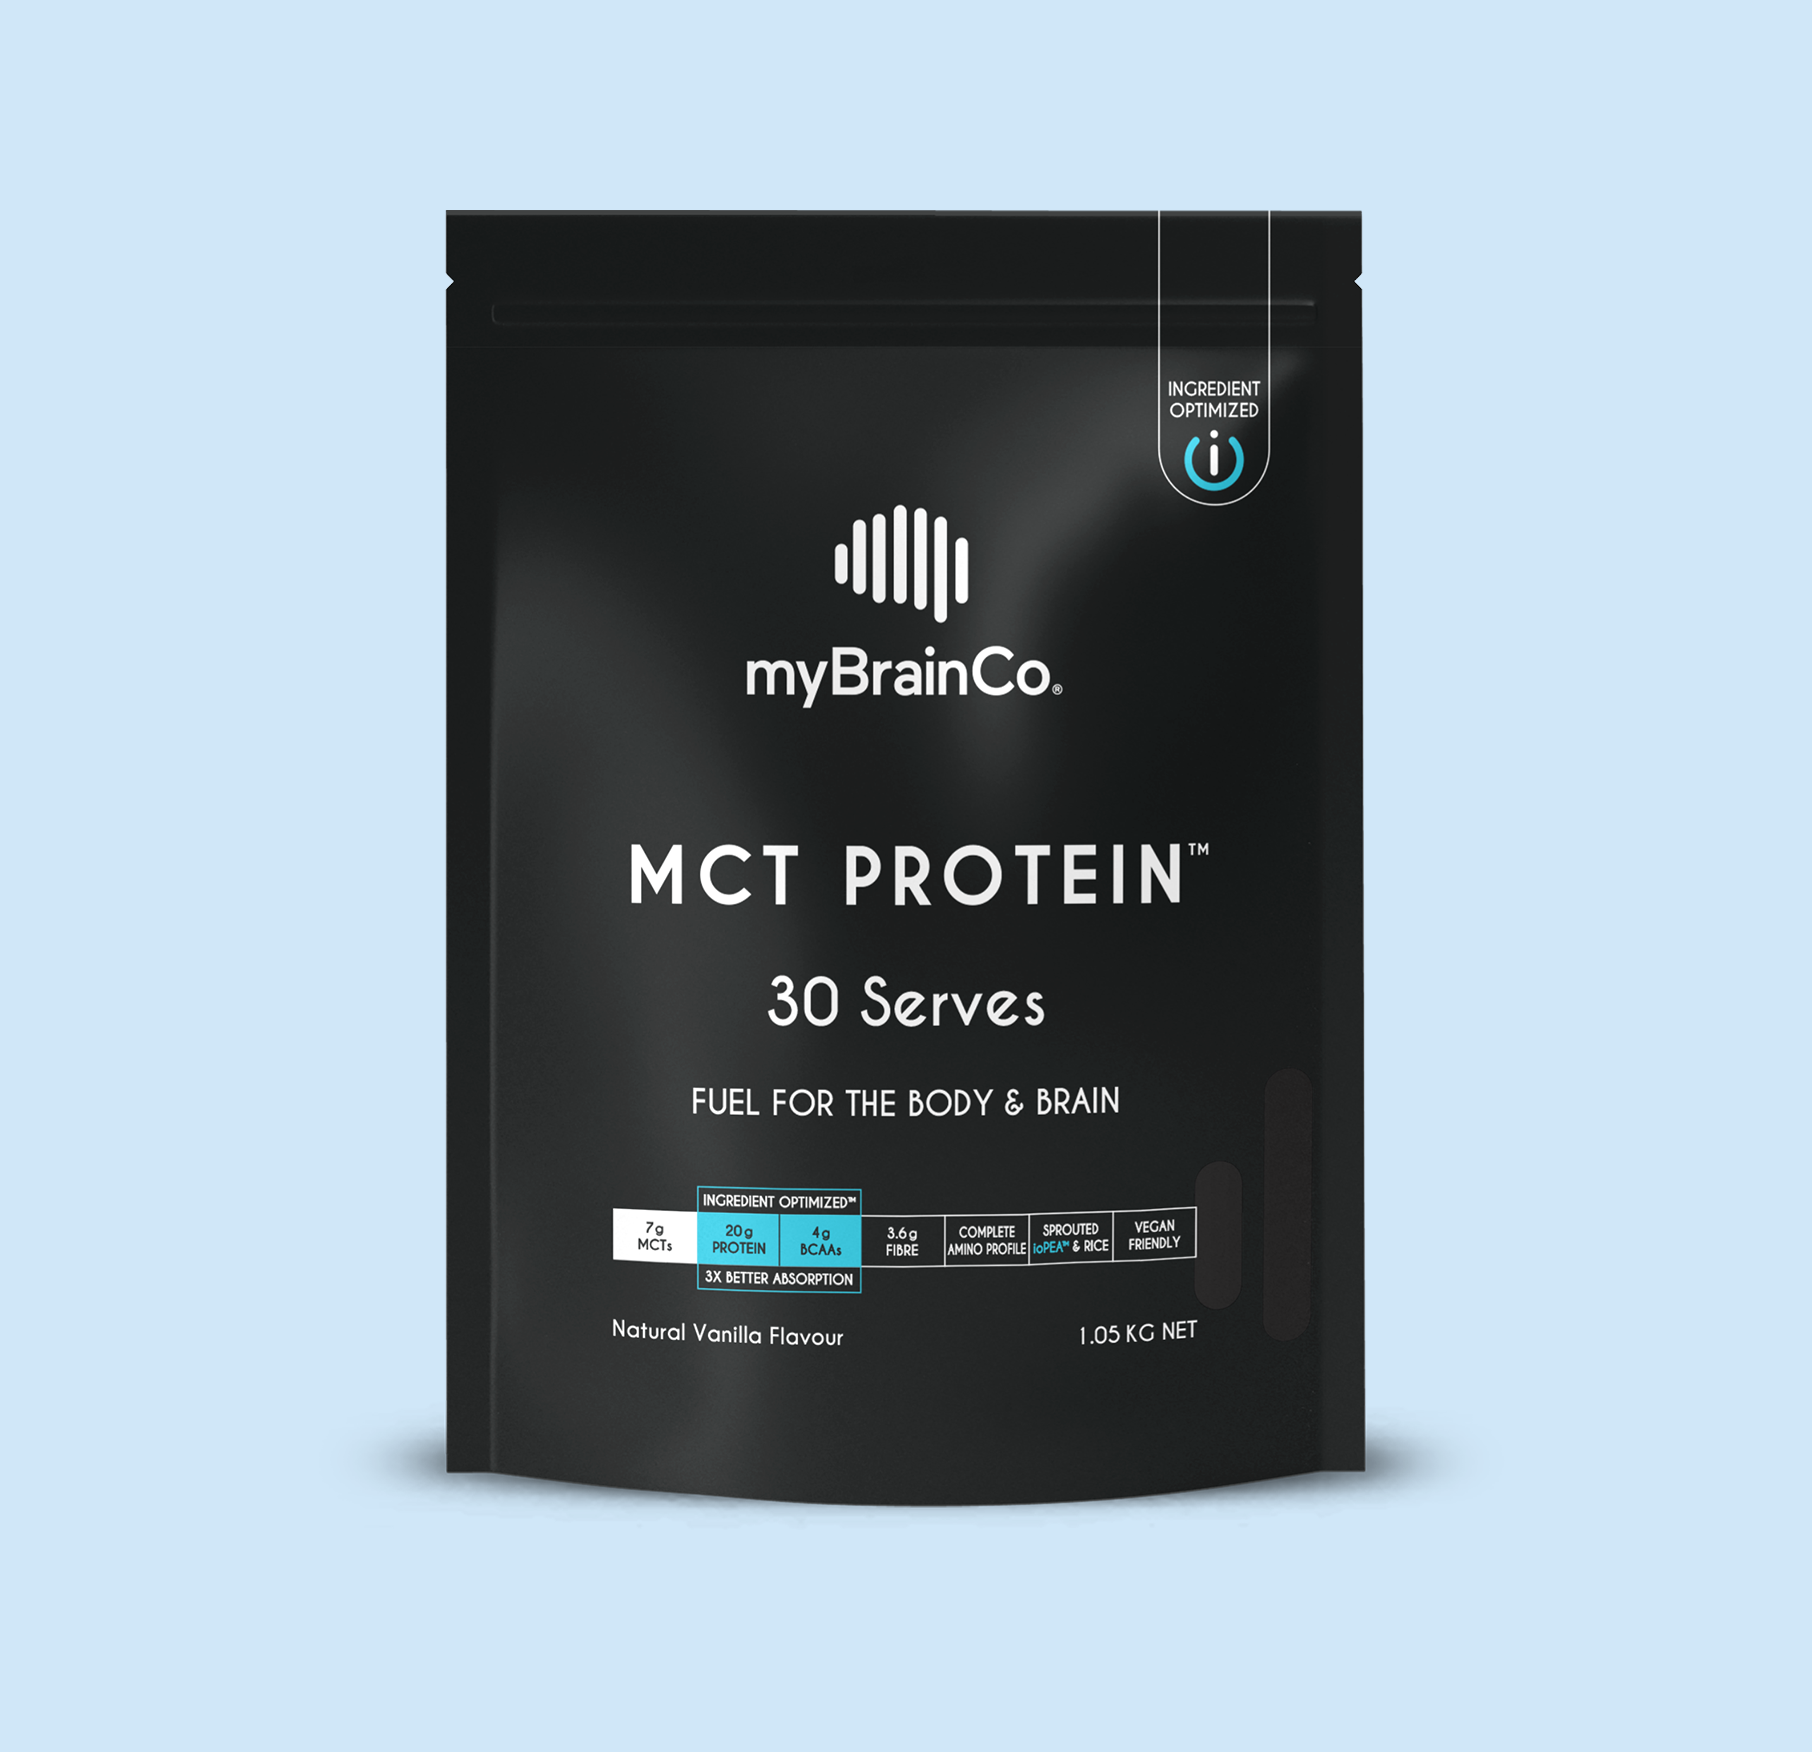 MCT PROTEIN™